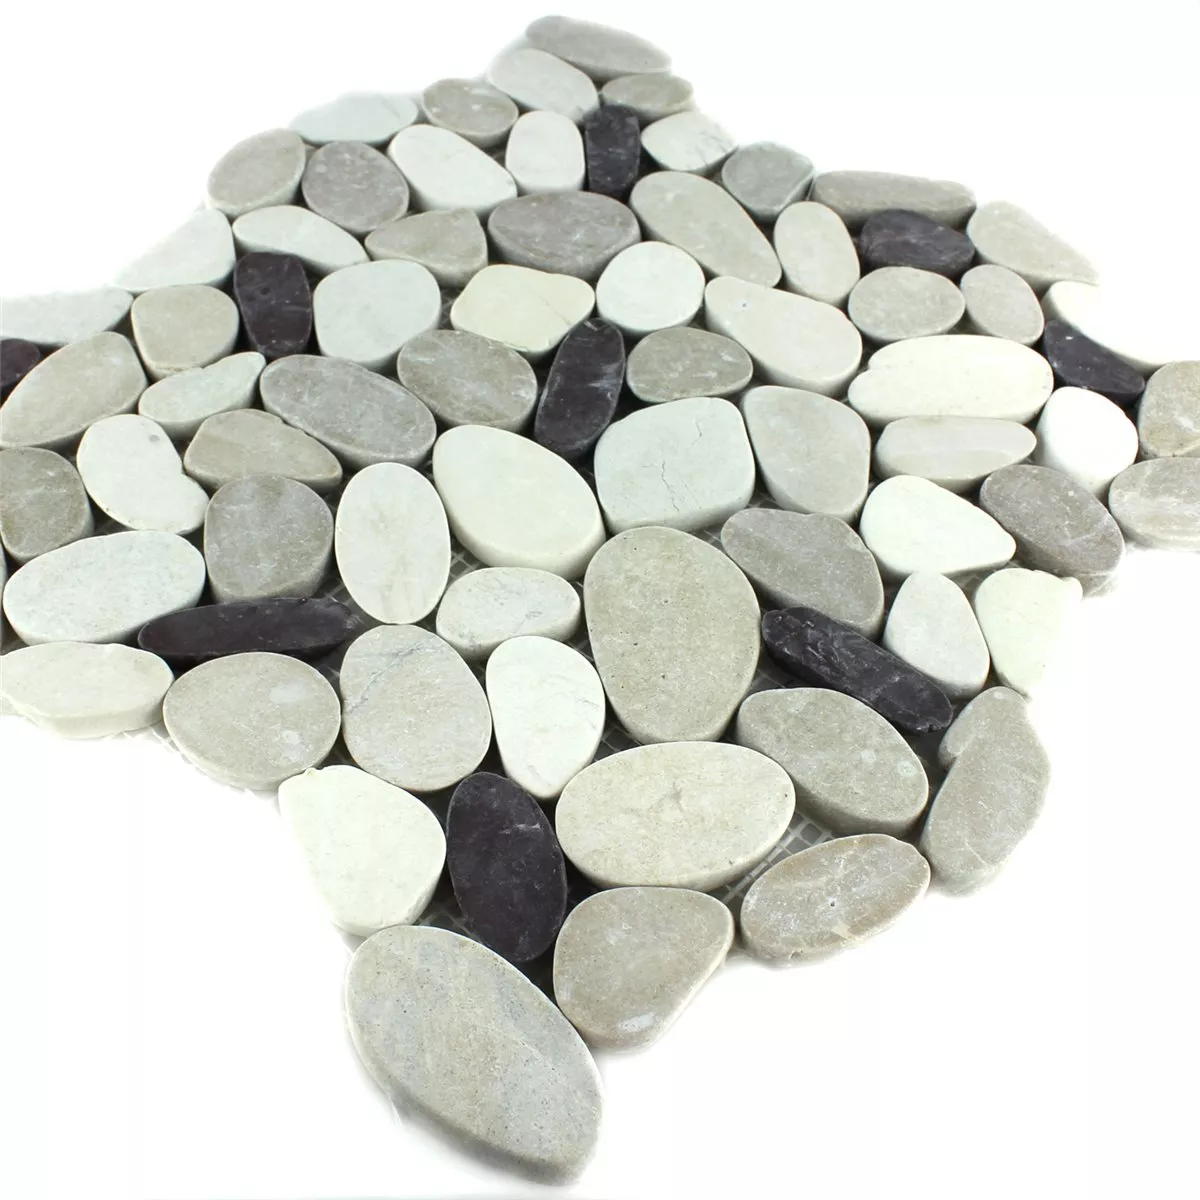 Sample Mosaic Tiles River Pebbles Serrated White Beige Pink